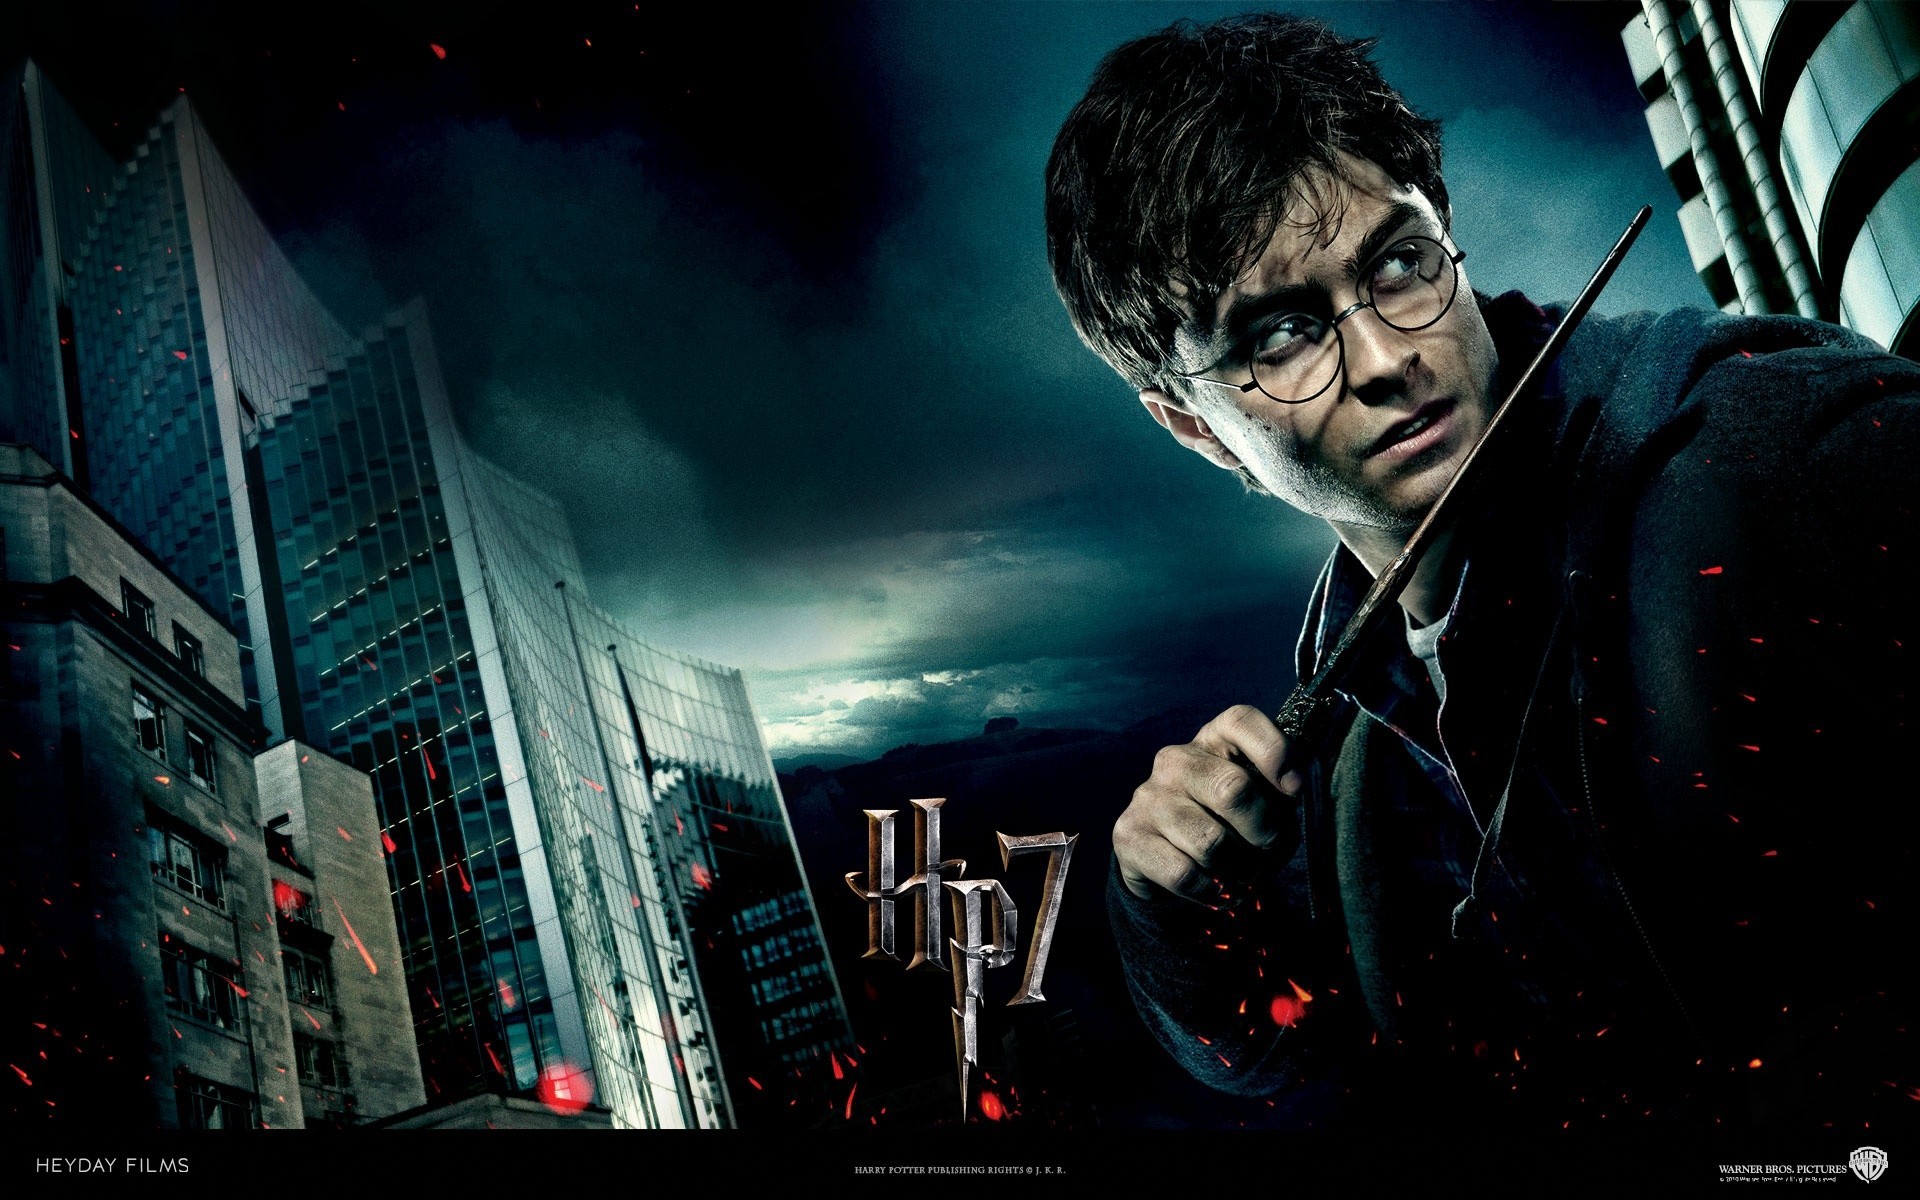 harry potter wallpaper download,movie,poster,darkness,fictional character,games